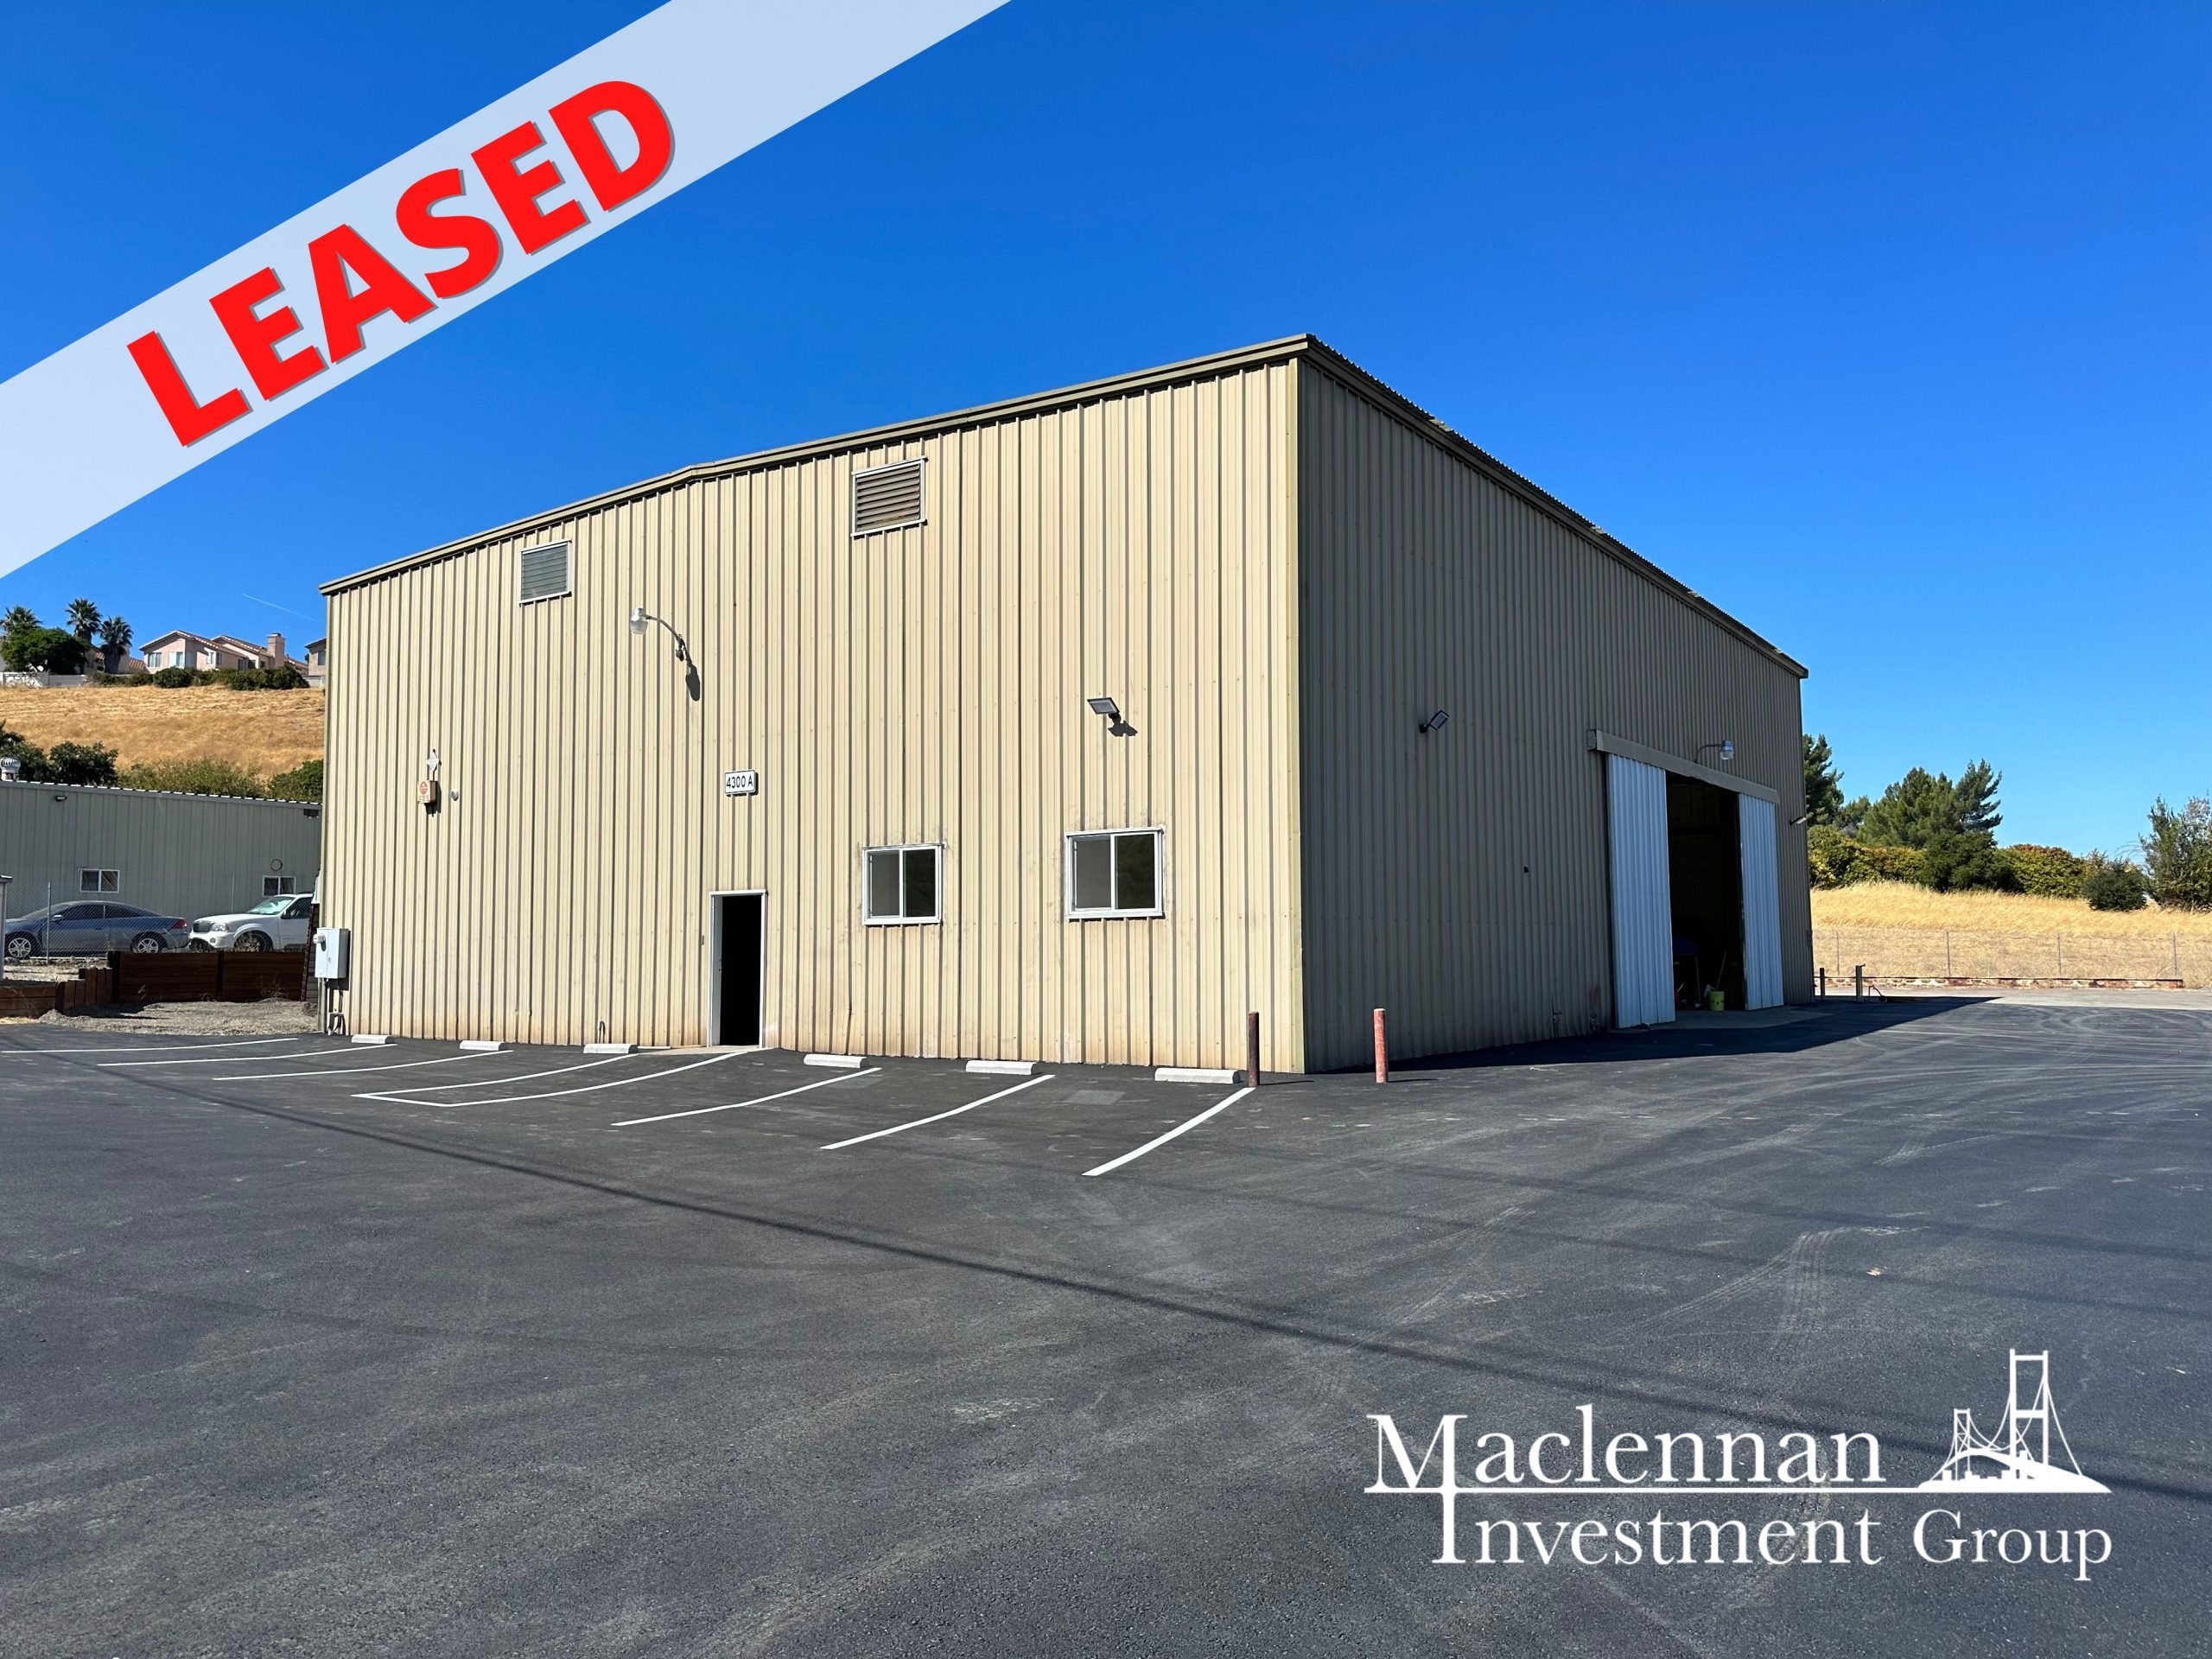 Light Industrial Property at 4300A Evora Rd has been leased.